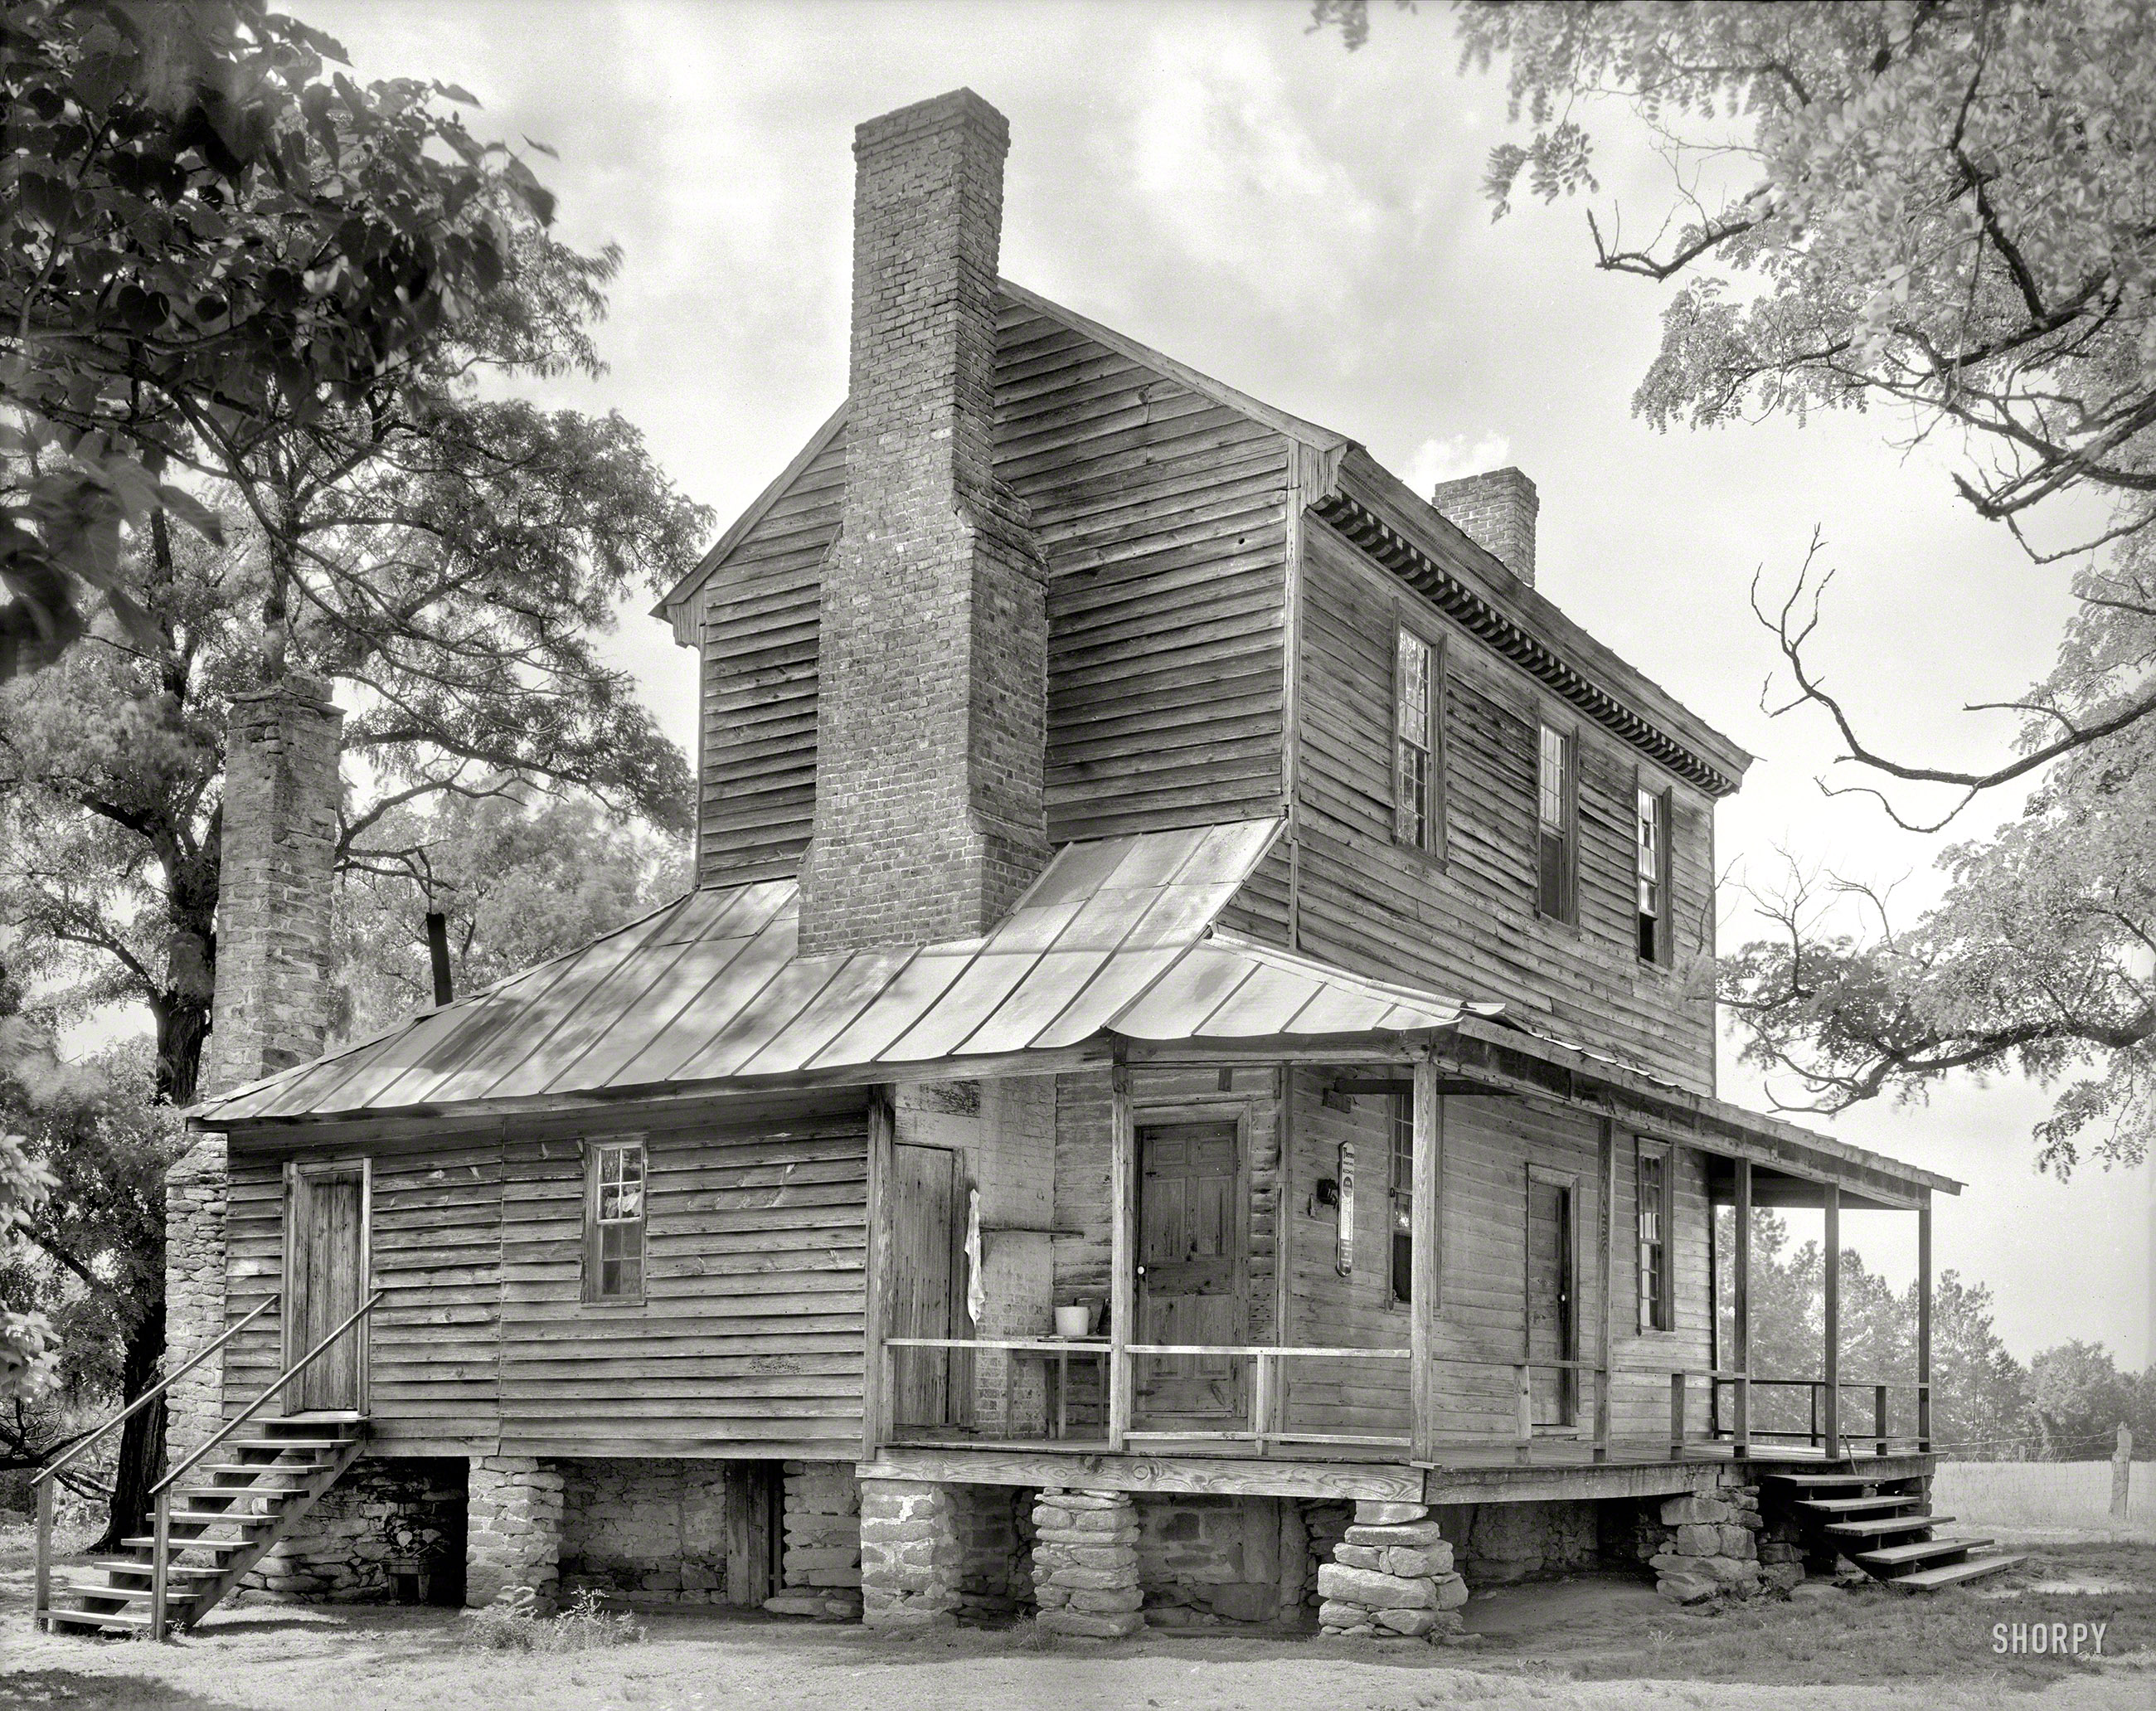 It's cozy and it's creaky,
The roof's a little leaky.
So shabby and so chic we
Flipped it for one point three.

1936. "Peggy Wright House, Louisburg vicinity, Franklin County, North Carolina. Structure dates to 1796." A house whose paint and charm are inversely proportional. 8x10 negative by Frances Benjamin Johnston. View full size.